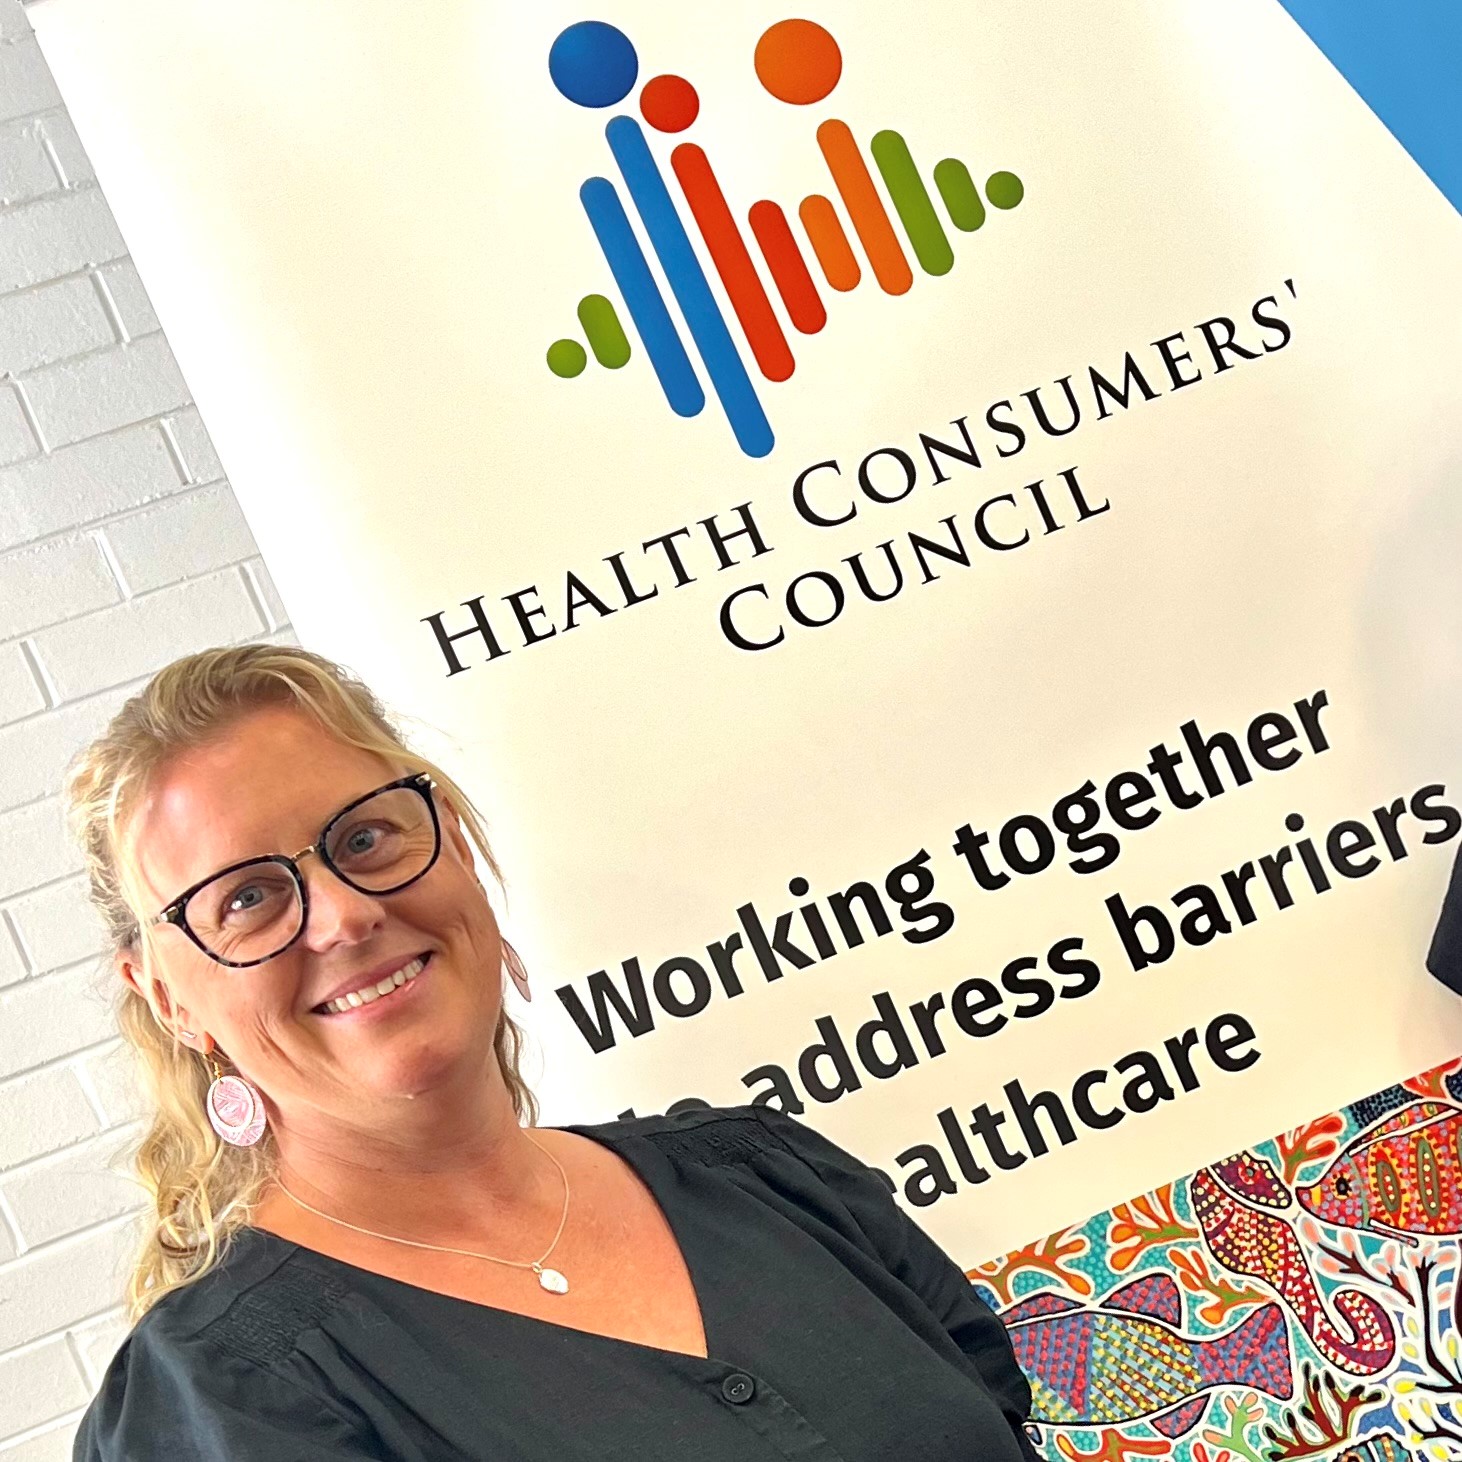 Suzanna Robertson, executivedirector of Health Consumers' Council, head and shoulders pictured to the left of a branded banner with logo and tagline that reads "Health Consumers' Council, working together to address barriers in healthcare".